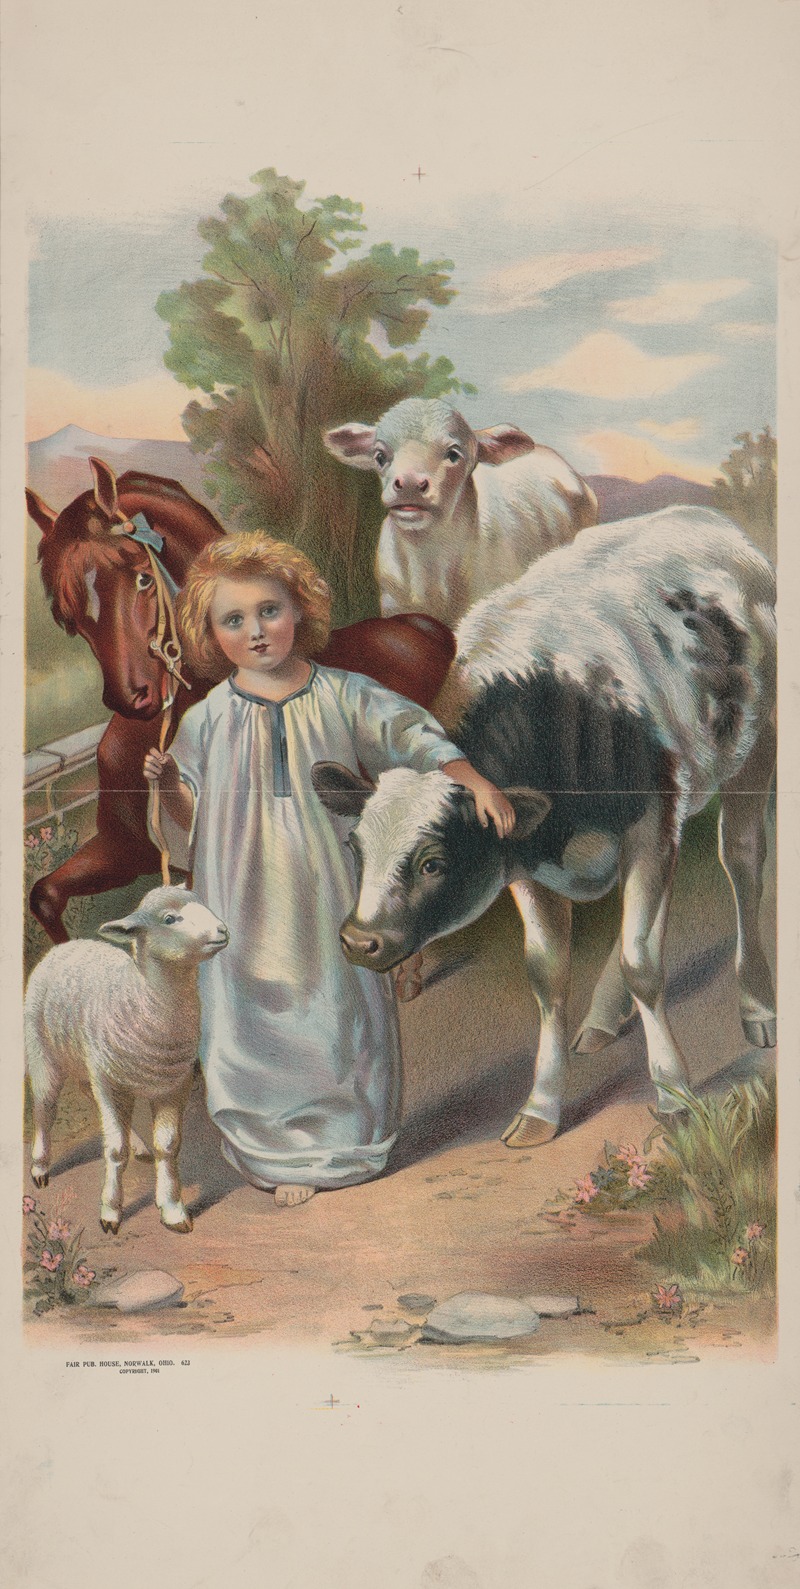 Fair Pub. House - Child with lamb, horse, and cows